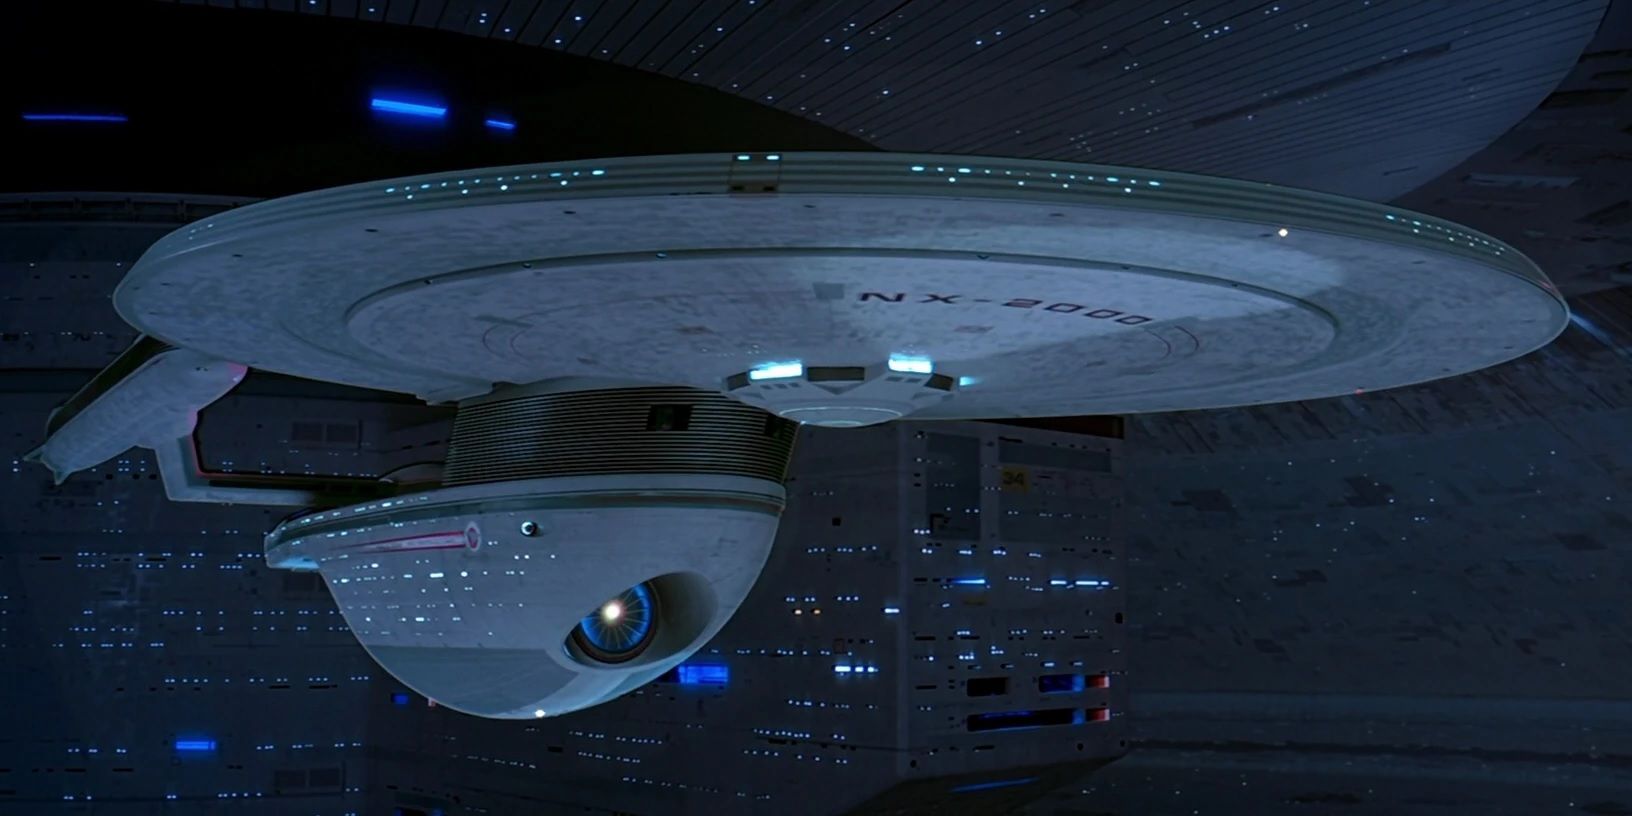 The USS Excelsior docked at a starbase.